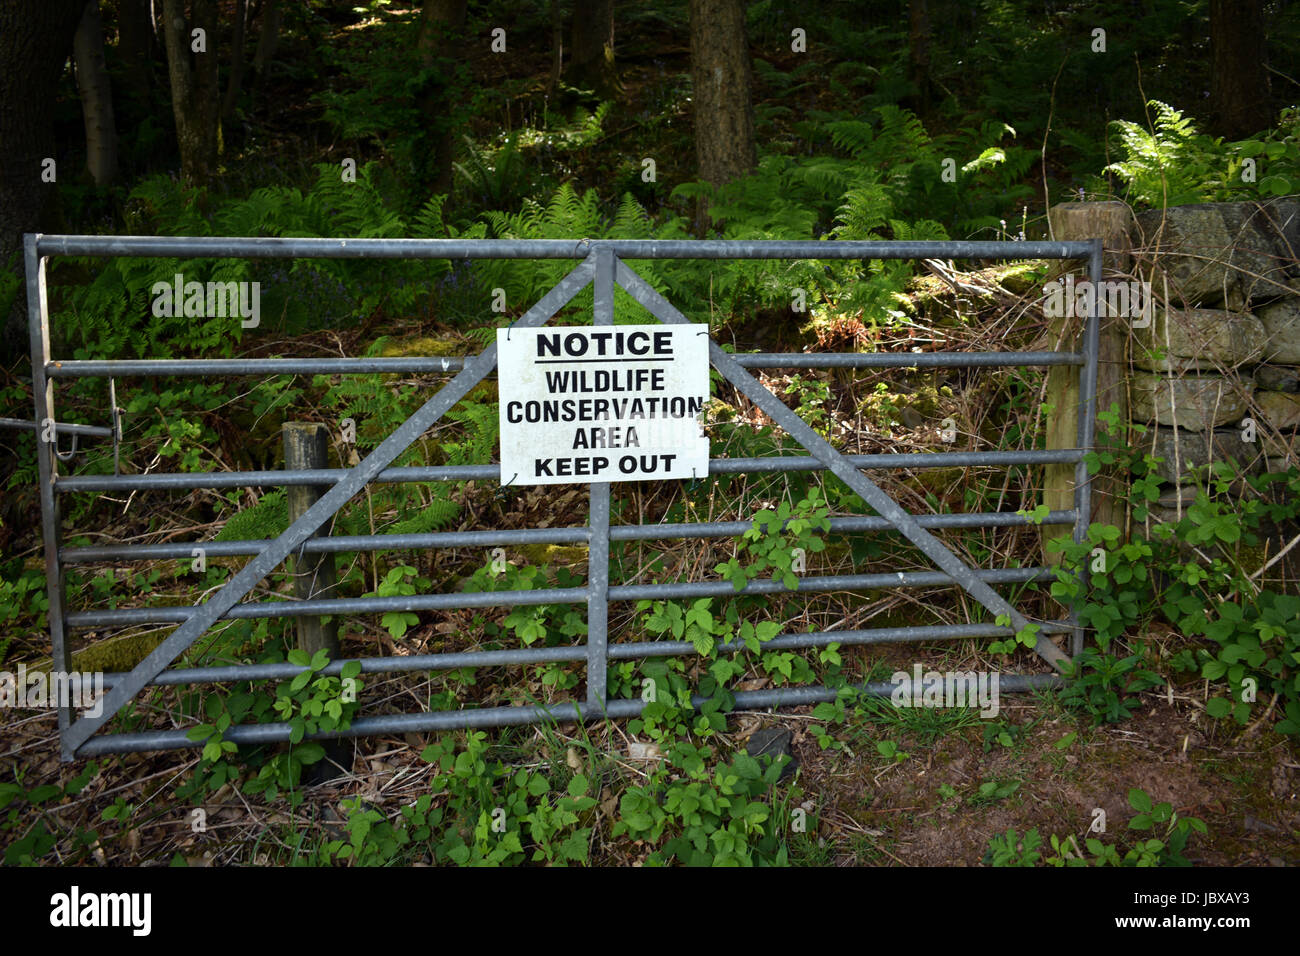 WILDLIFE CONSERVATION SIGN ON GATE Stock Photo